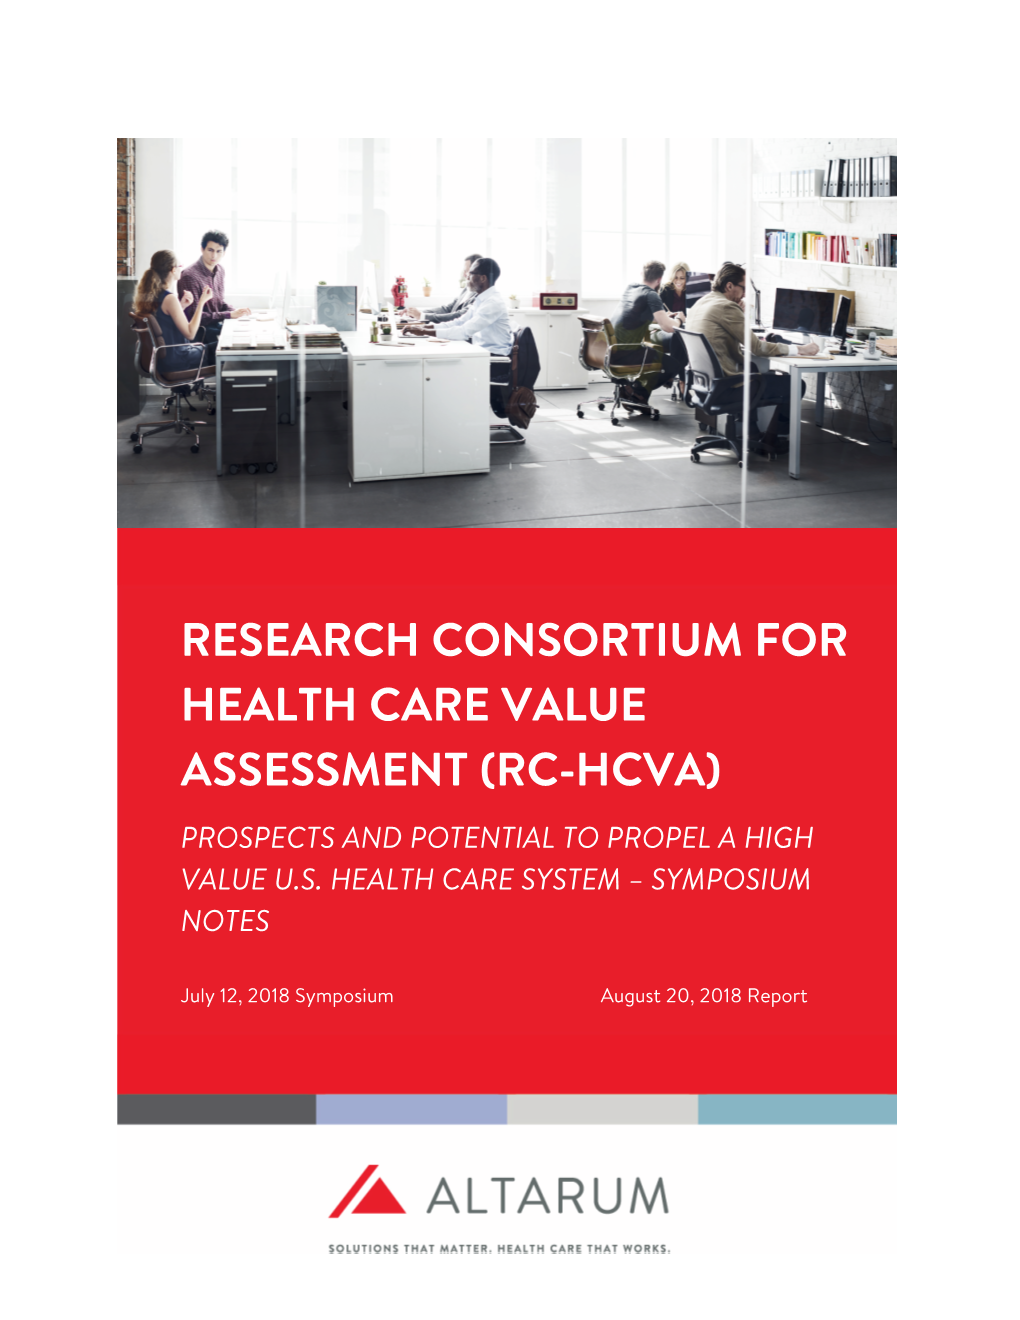 Research Consortium for Health Care Value Assessment (Rc-Hcva) Prospects and Potential to Propel a High Value U.S